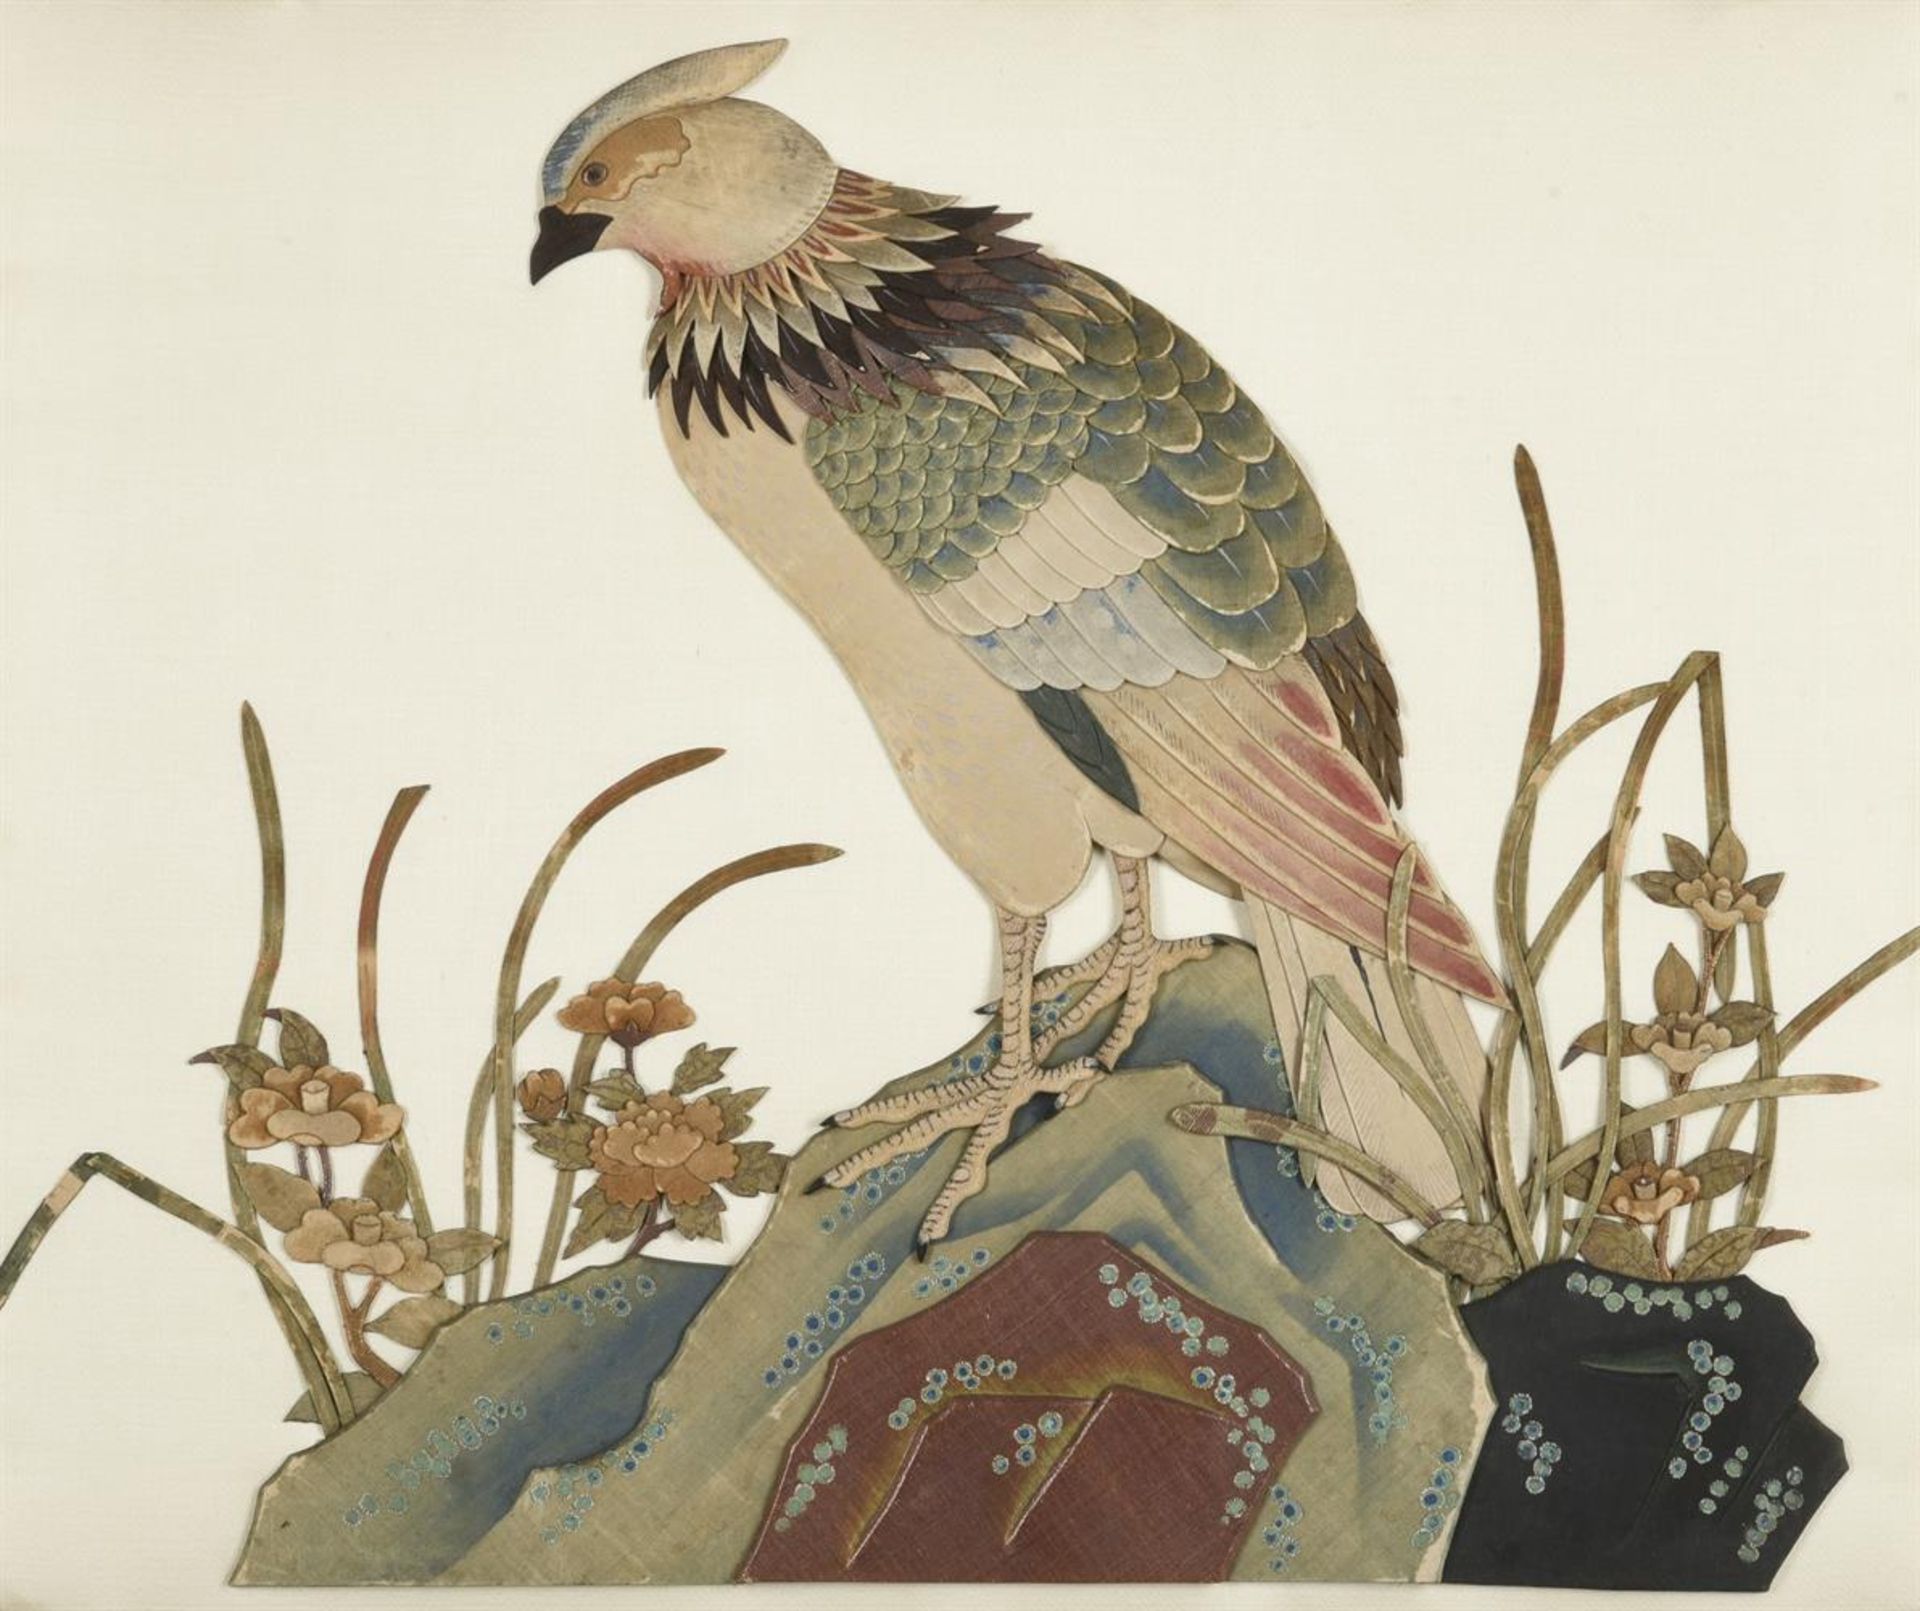 A PAIR OF MIXED MEDIA PICTURES OF BIRDS (20TH CENTURY) - Image 6 of 7